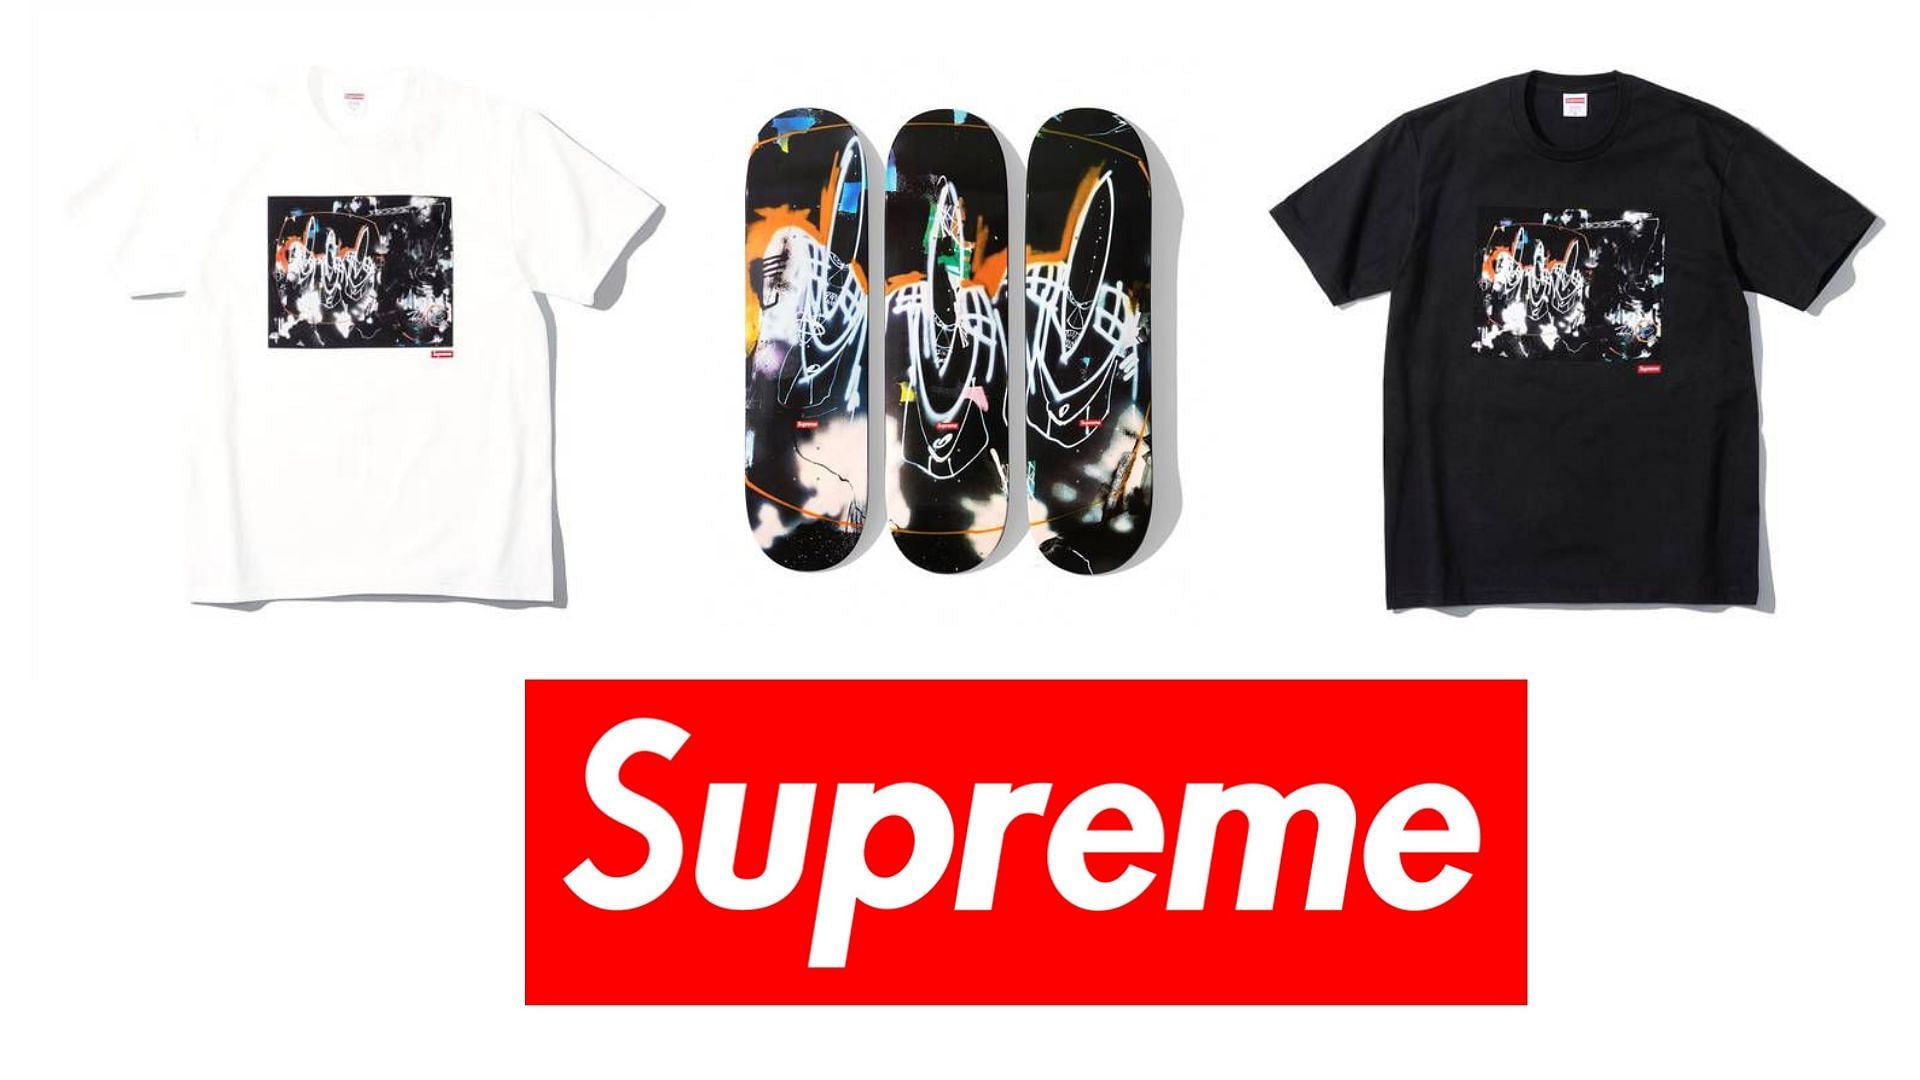 Where to buy Futura X Supreme collection? Price and more details